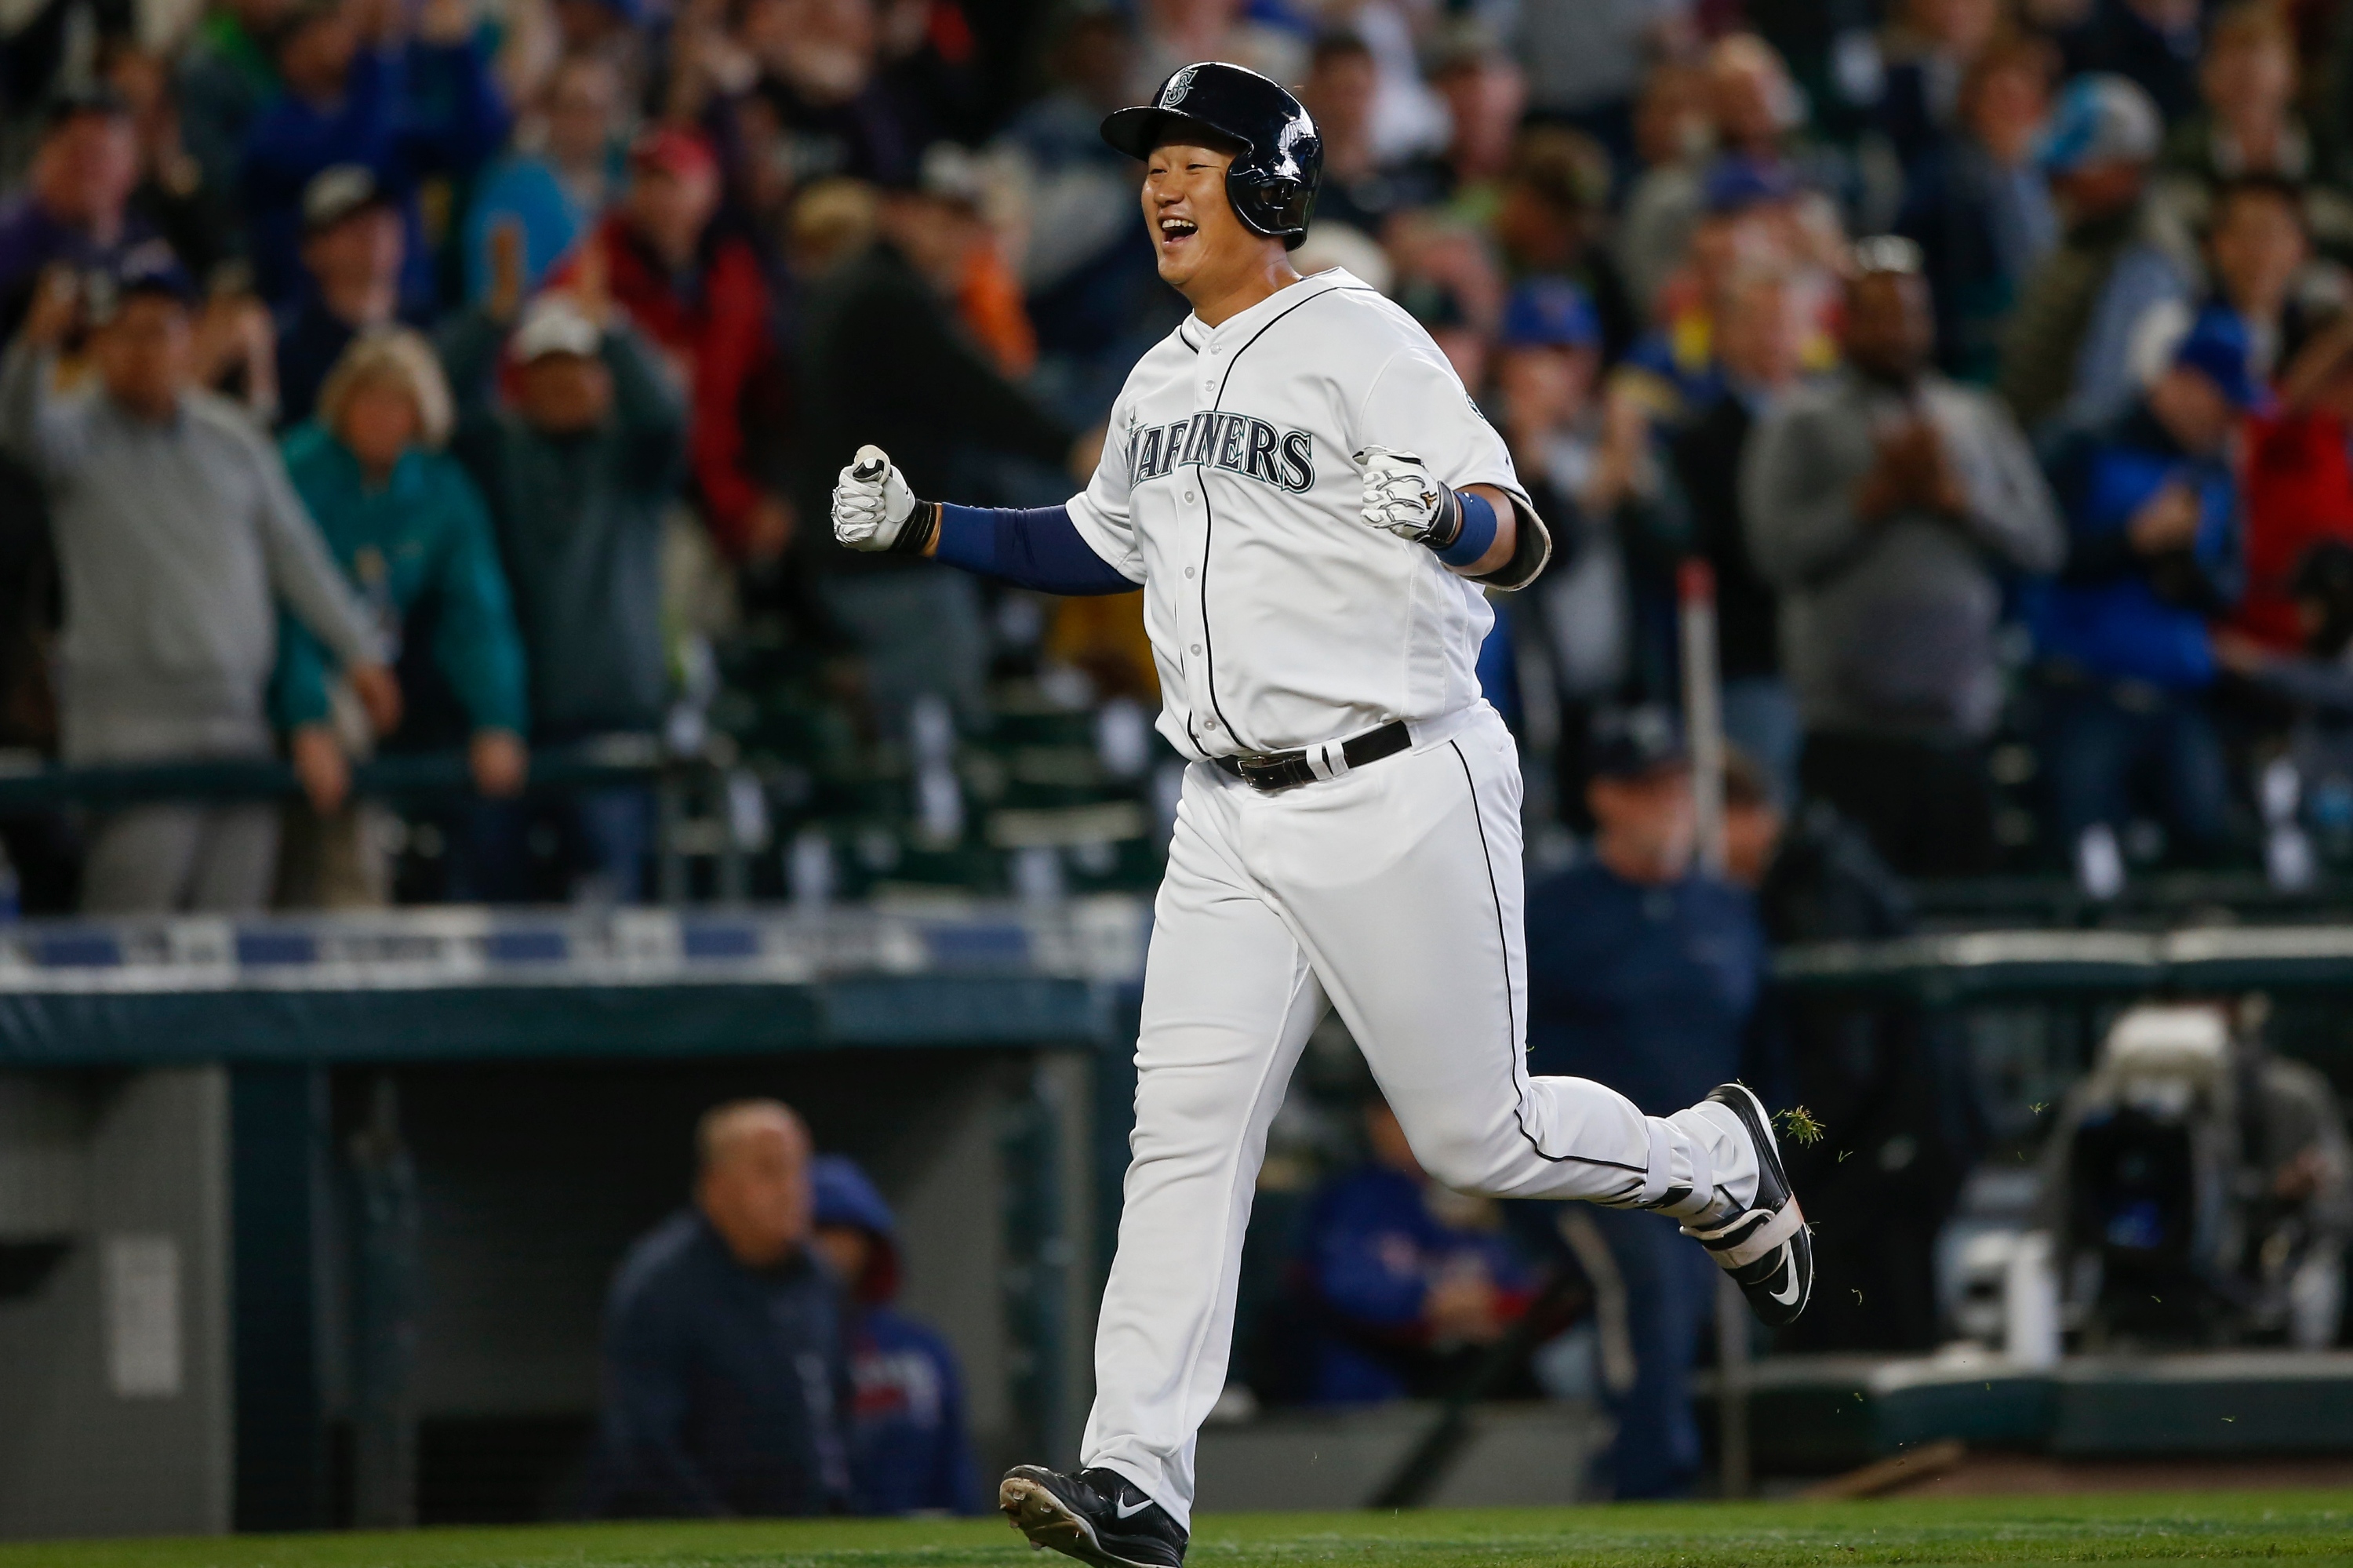 Dae-ho Lee of the Seattle Mariners celebrates as he rounds third a on a game-winning two-run homer in the tenth inning. (Photo by Otto Greule Jr/Getty Images)